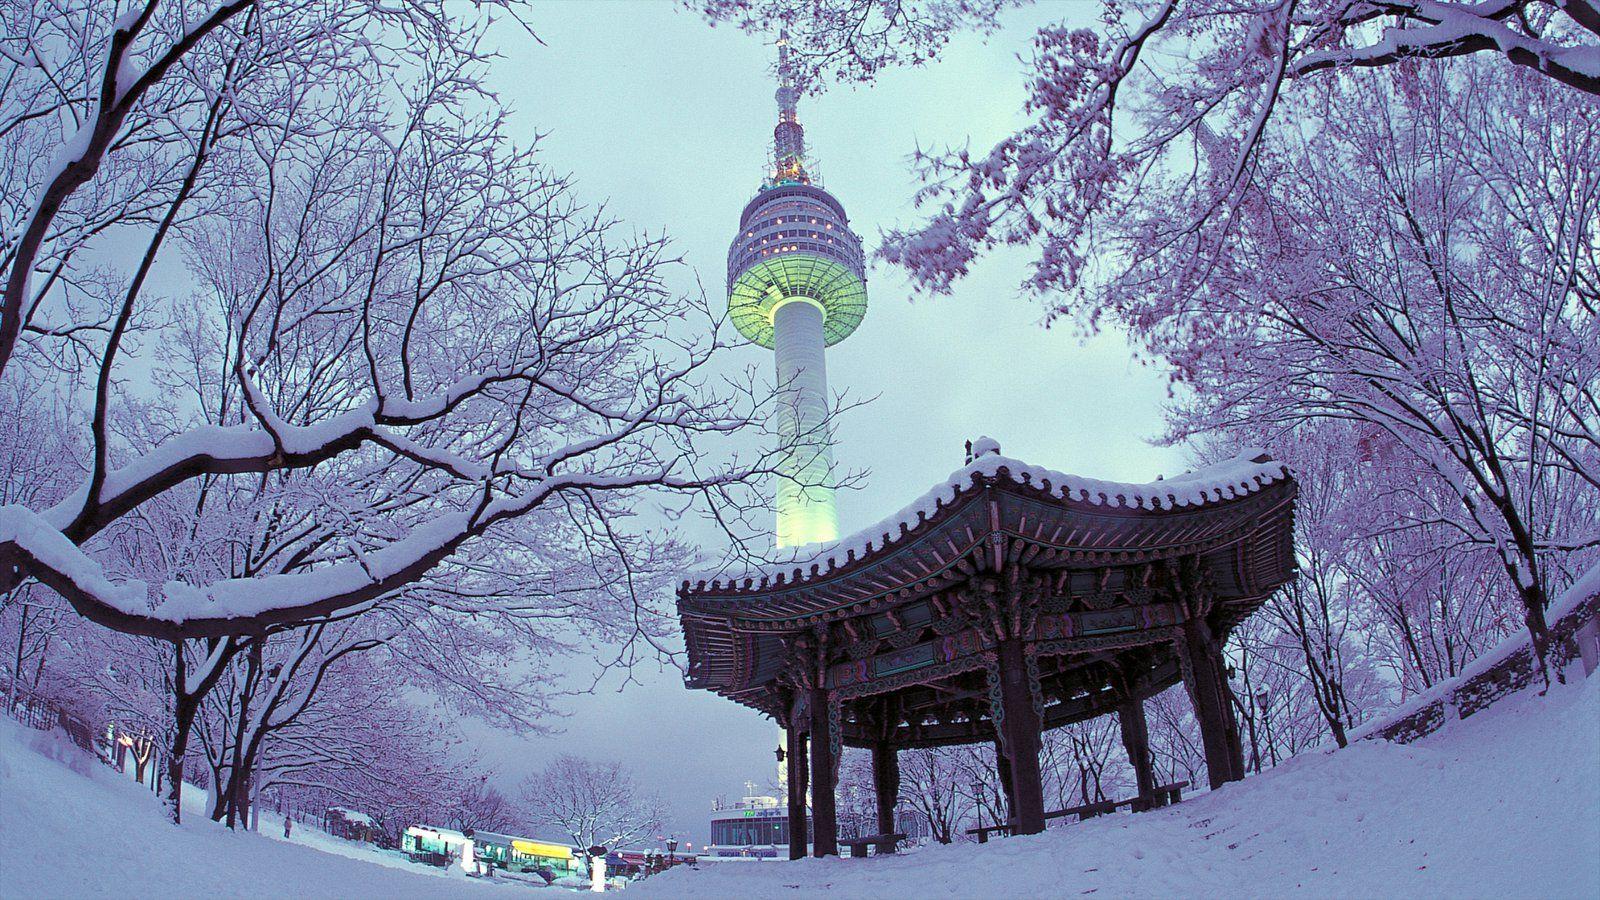 Seoul Tower Wallpapers Top Free Seoul Tower Backgrounds Images, Photos, Reviews